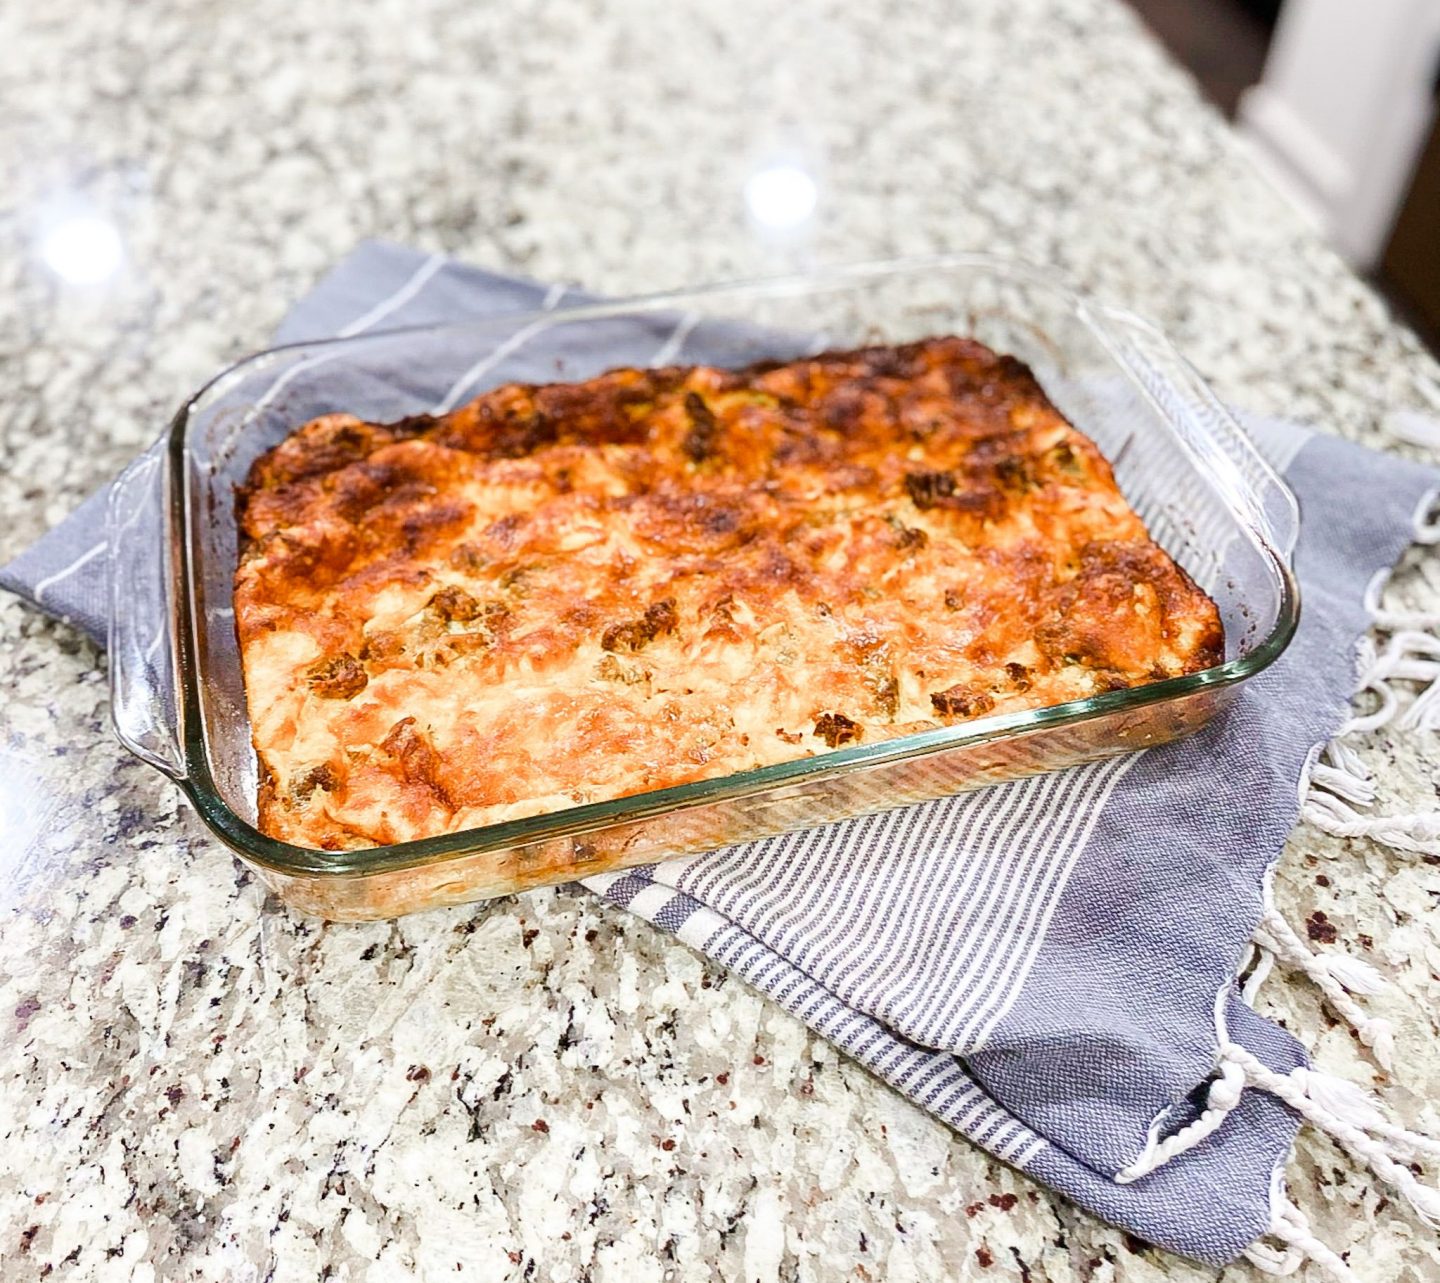 The Best Breakfast Casserole by Alabama Food + Family blogger, Heather Brown // My Life Well Loved